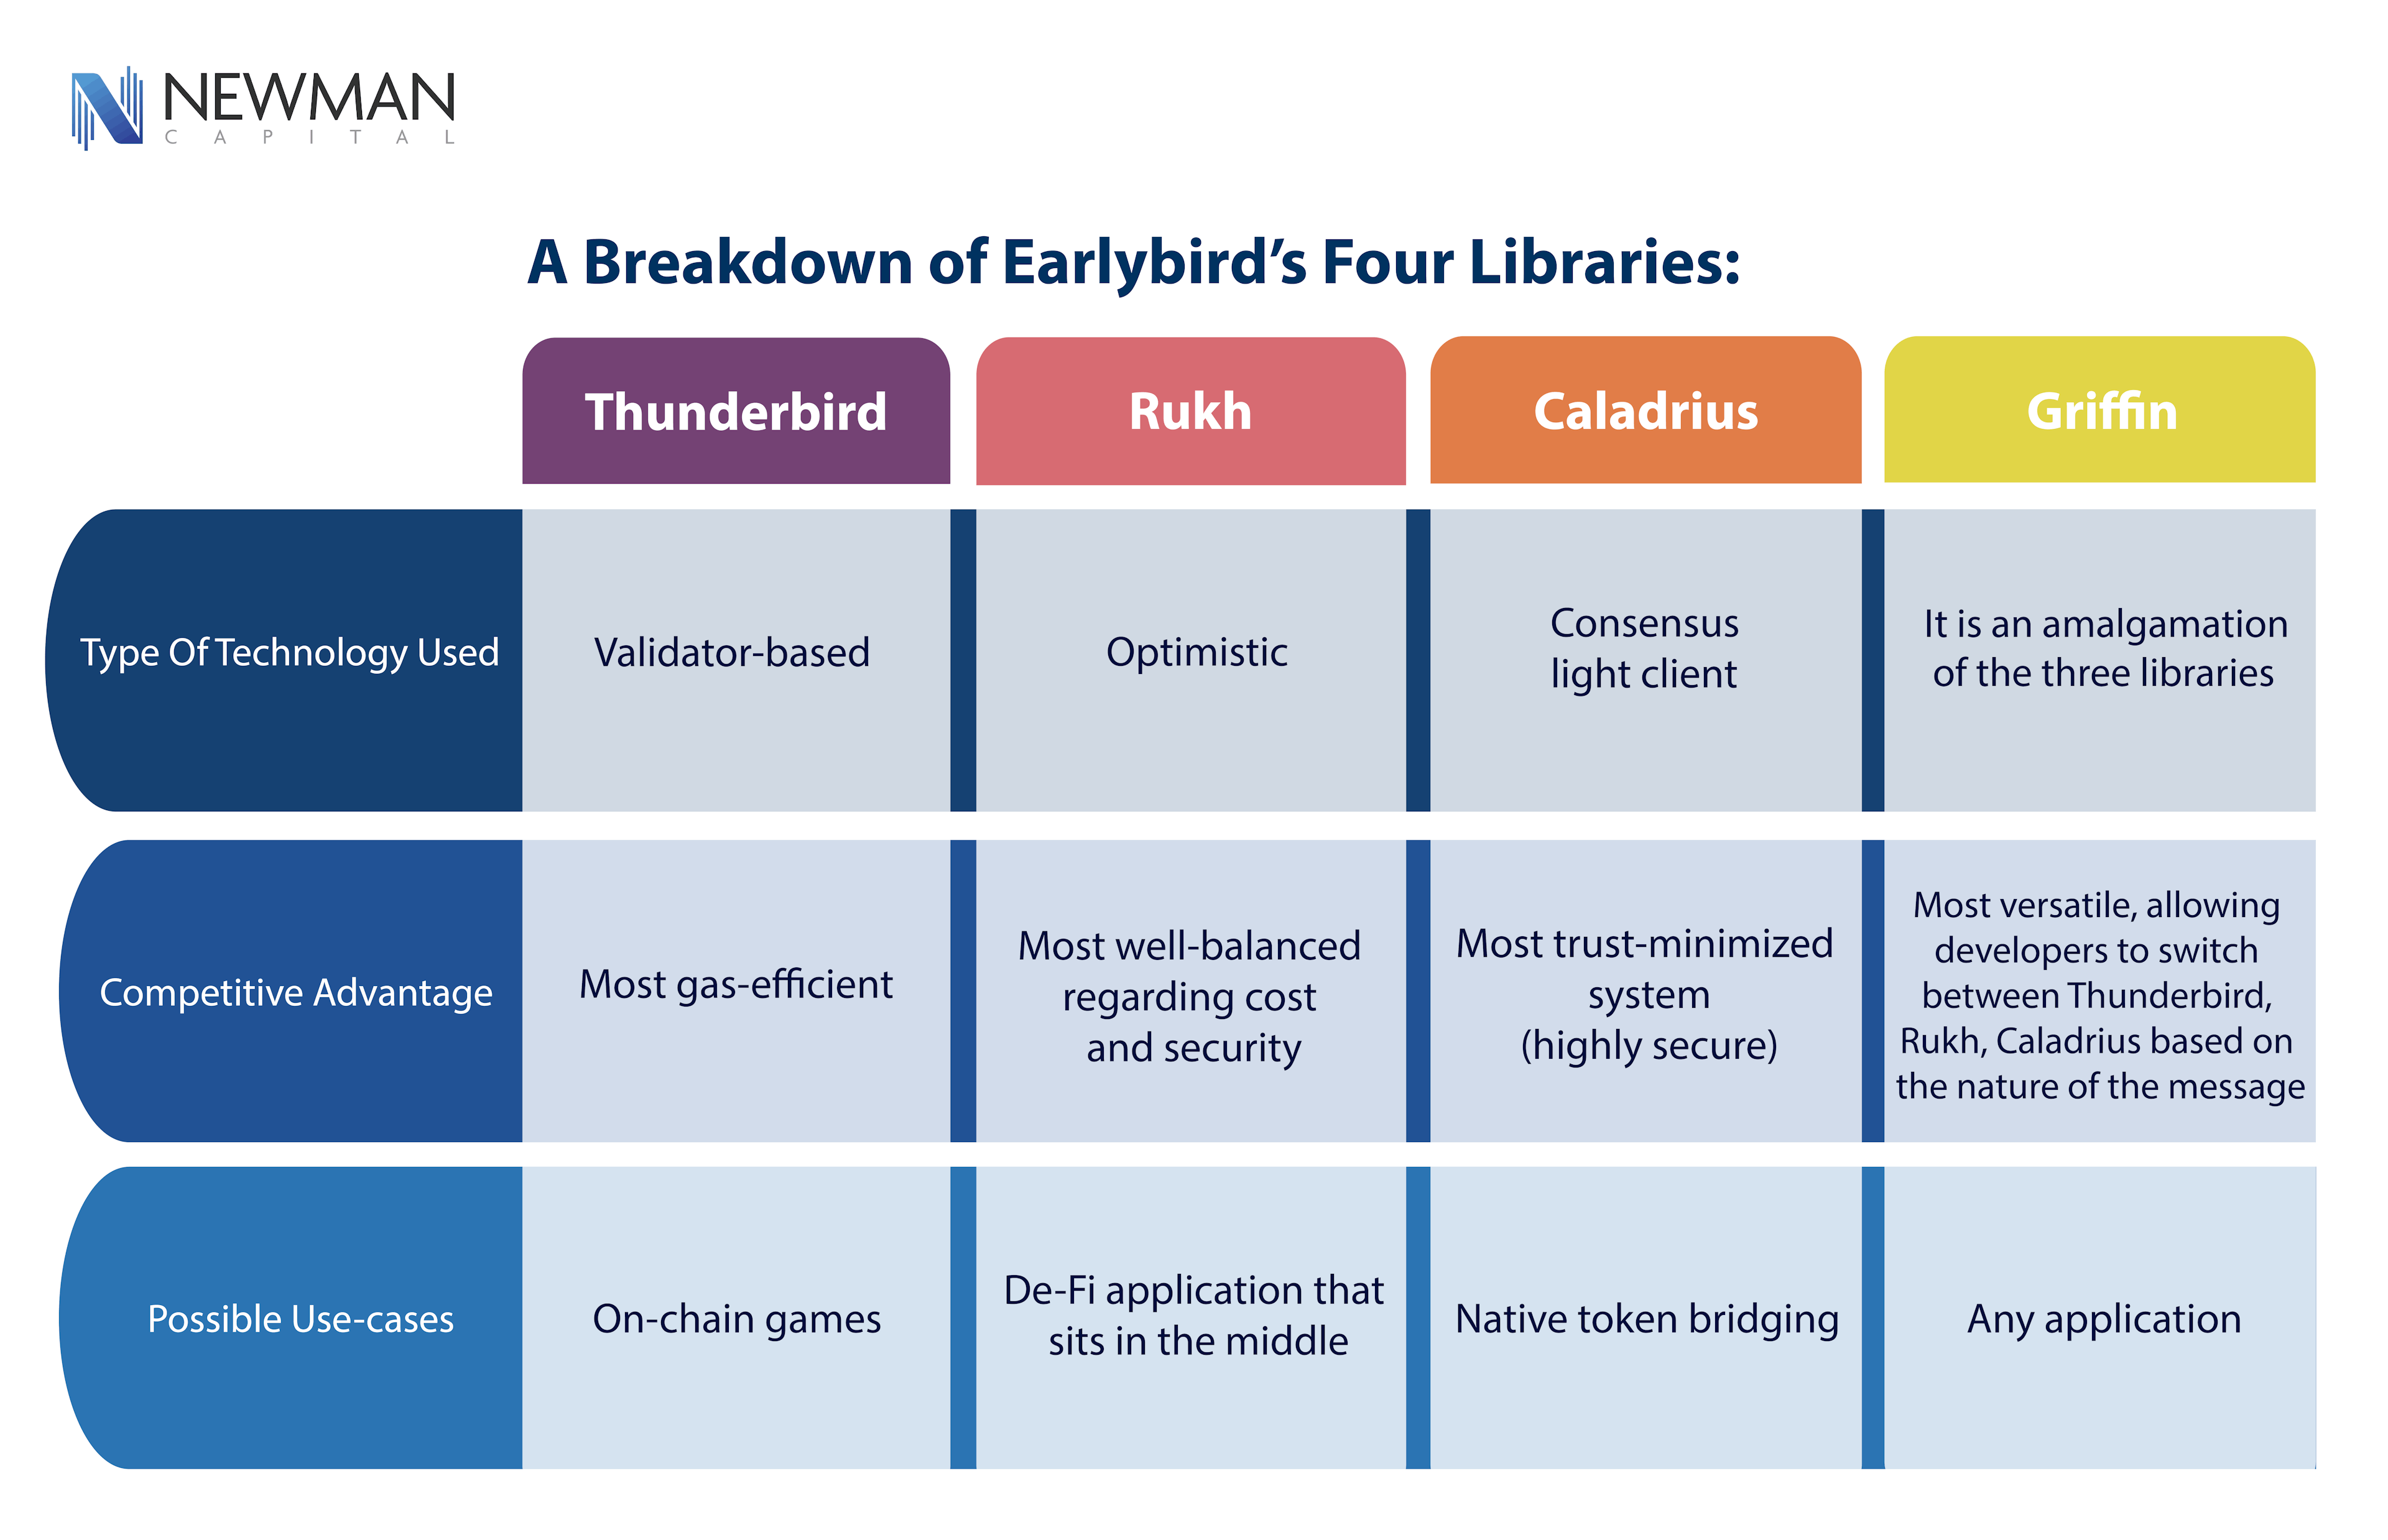 Table 1: Comparing attributes of Earlybird’s libraries